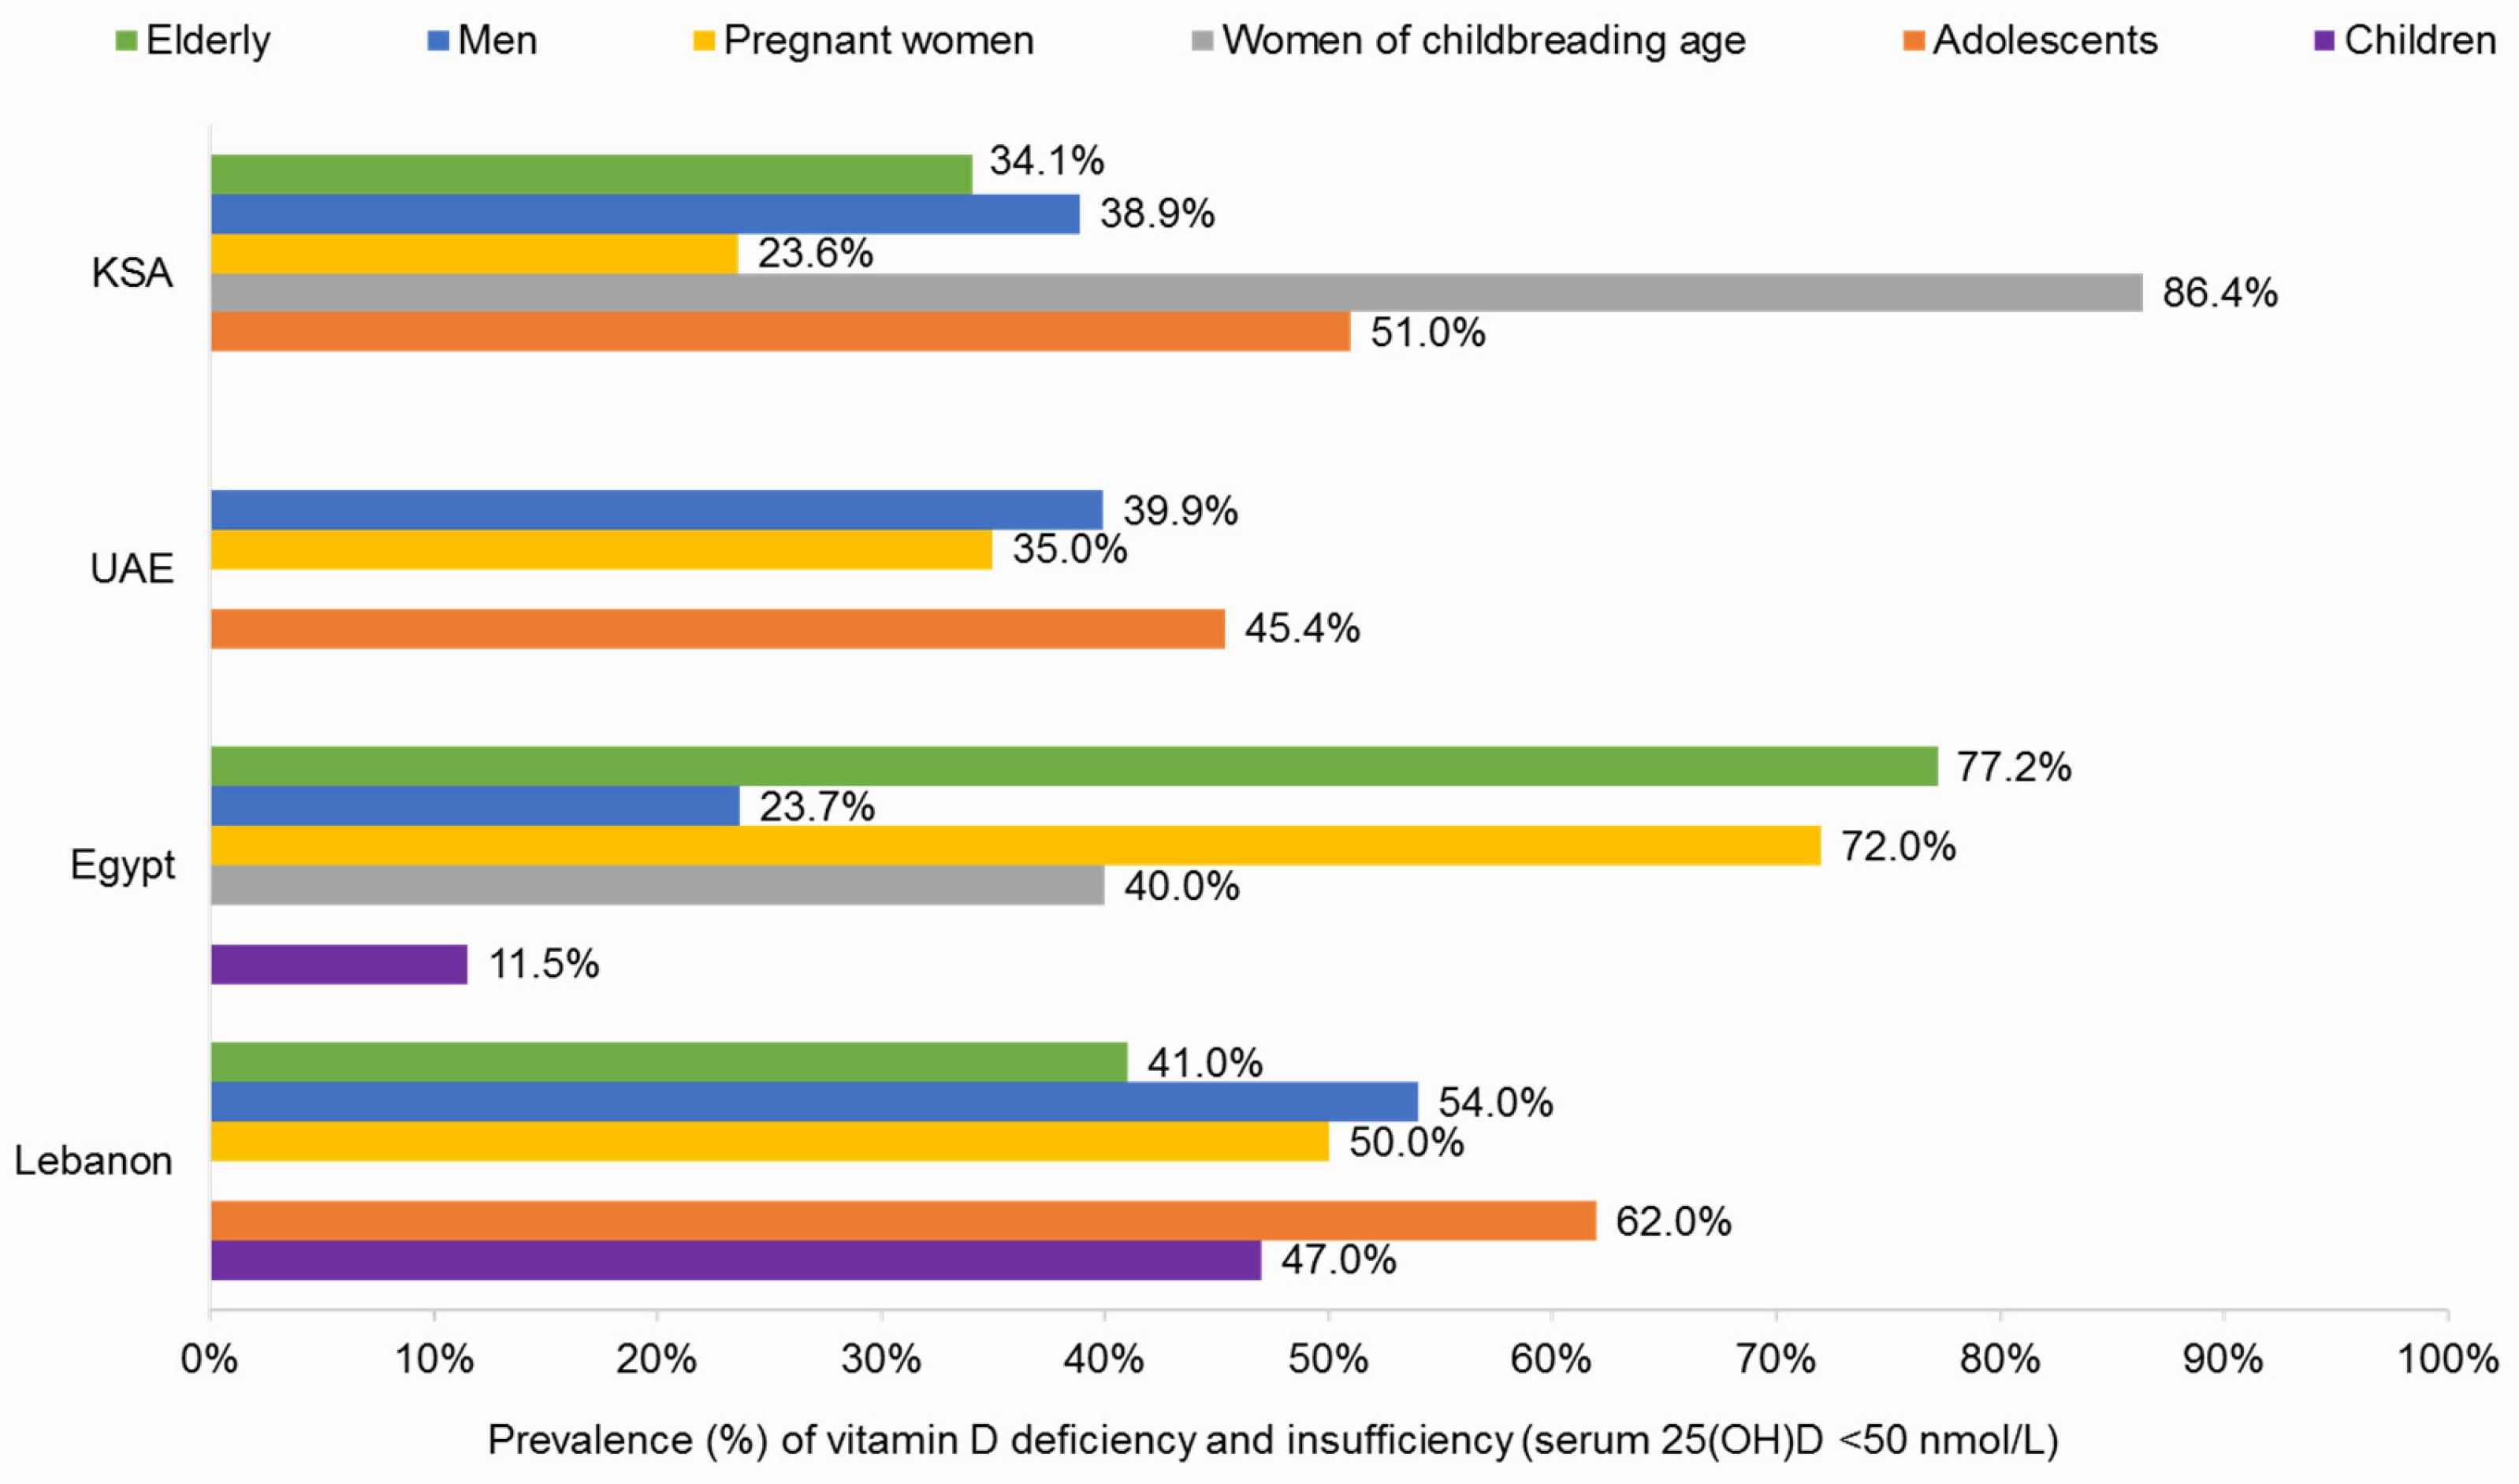 This graph shows the percentage of vitamin D deficiency in the MENA region, broken down by country and age group.